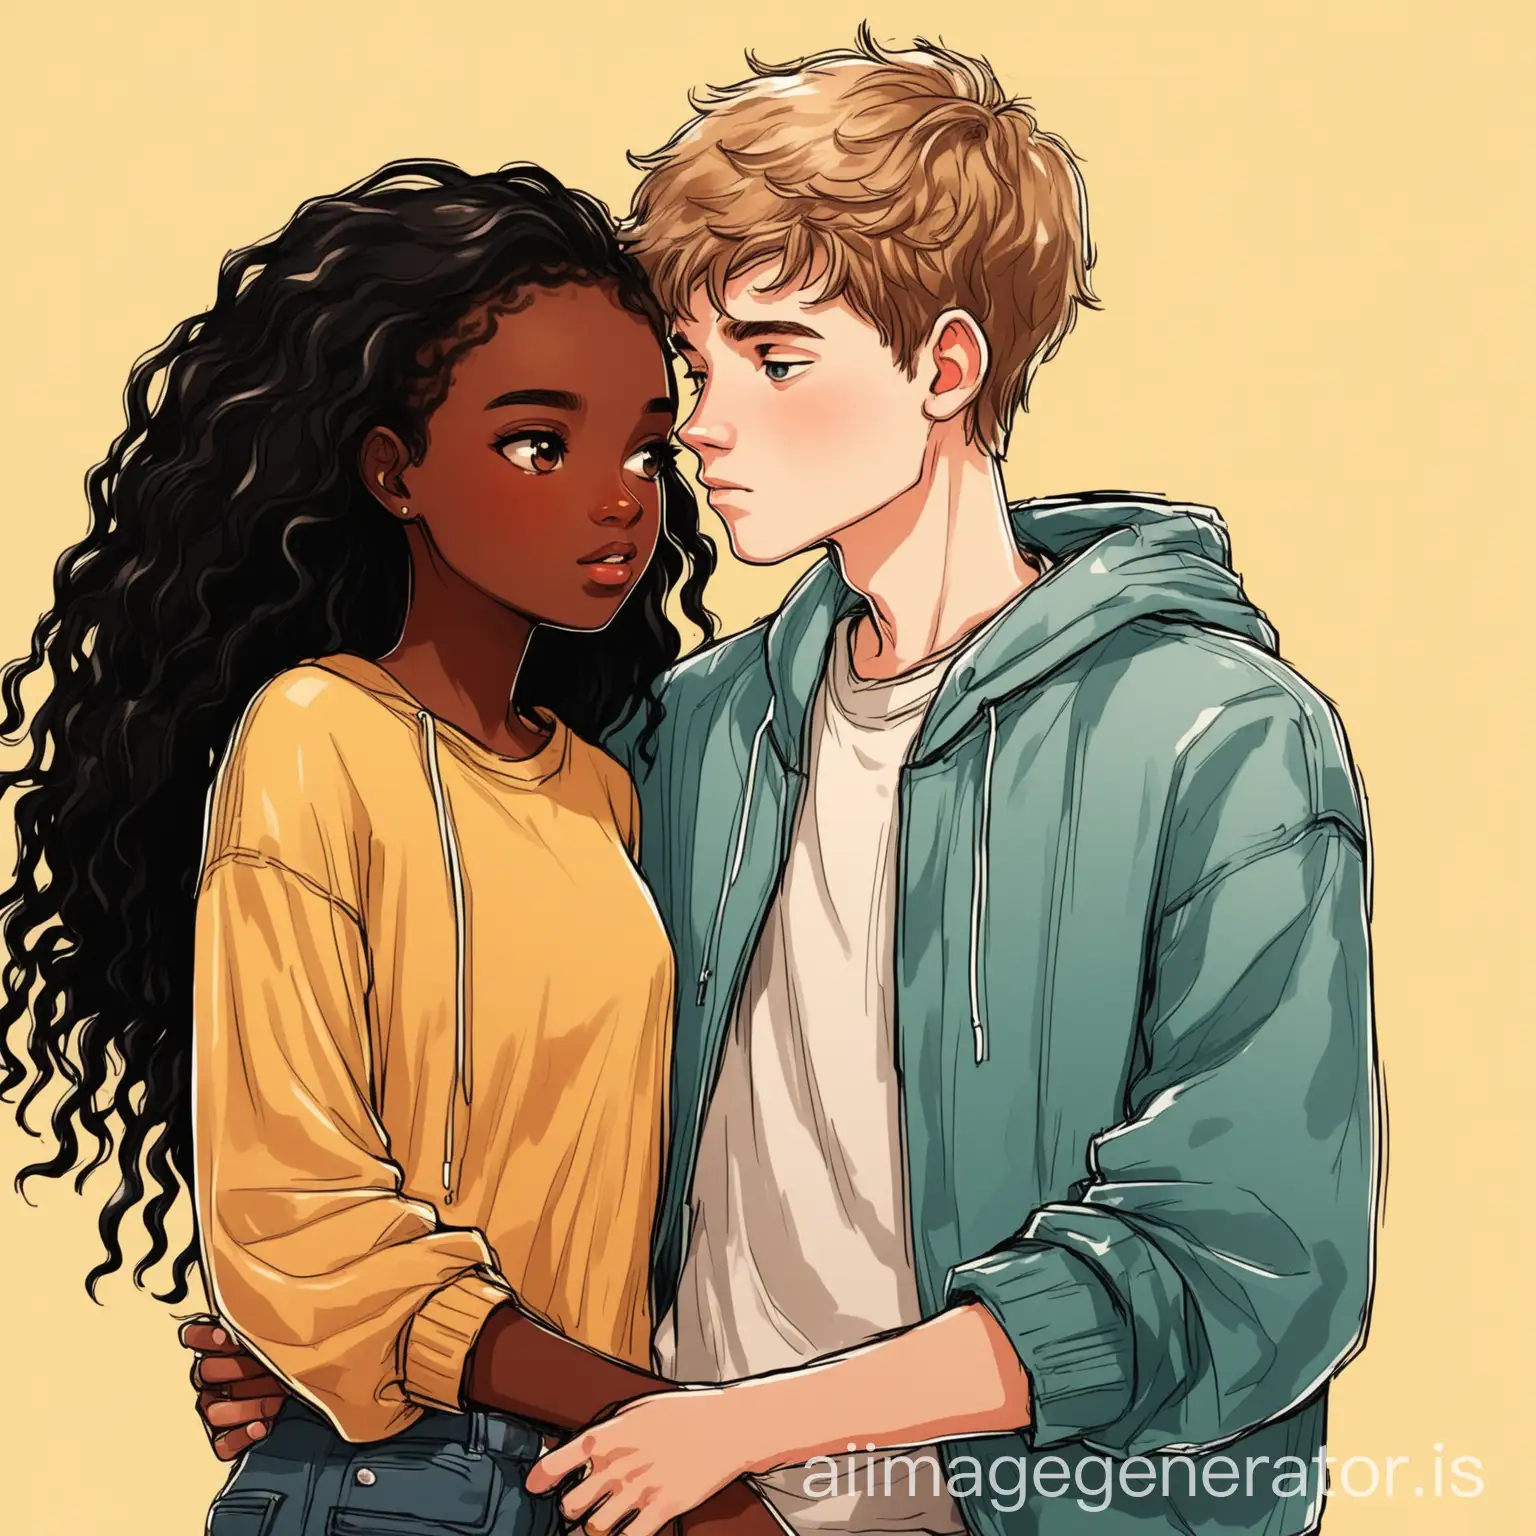 Illustrations, teens, black girl with White boy, couple